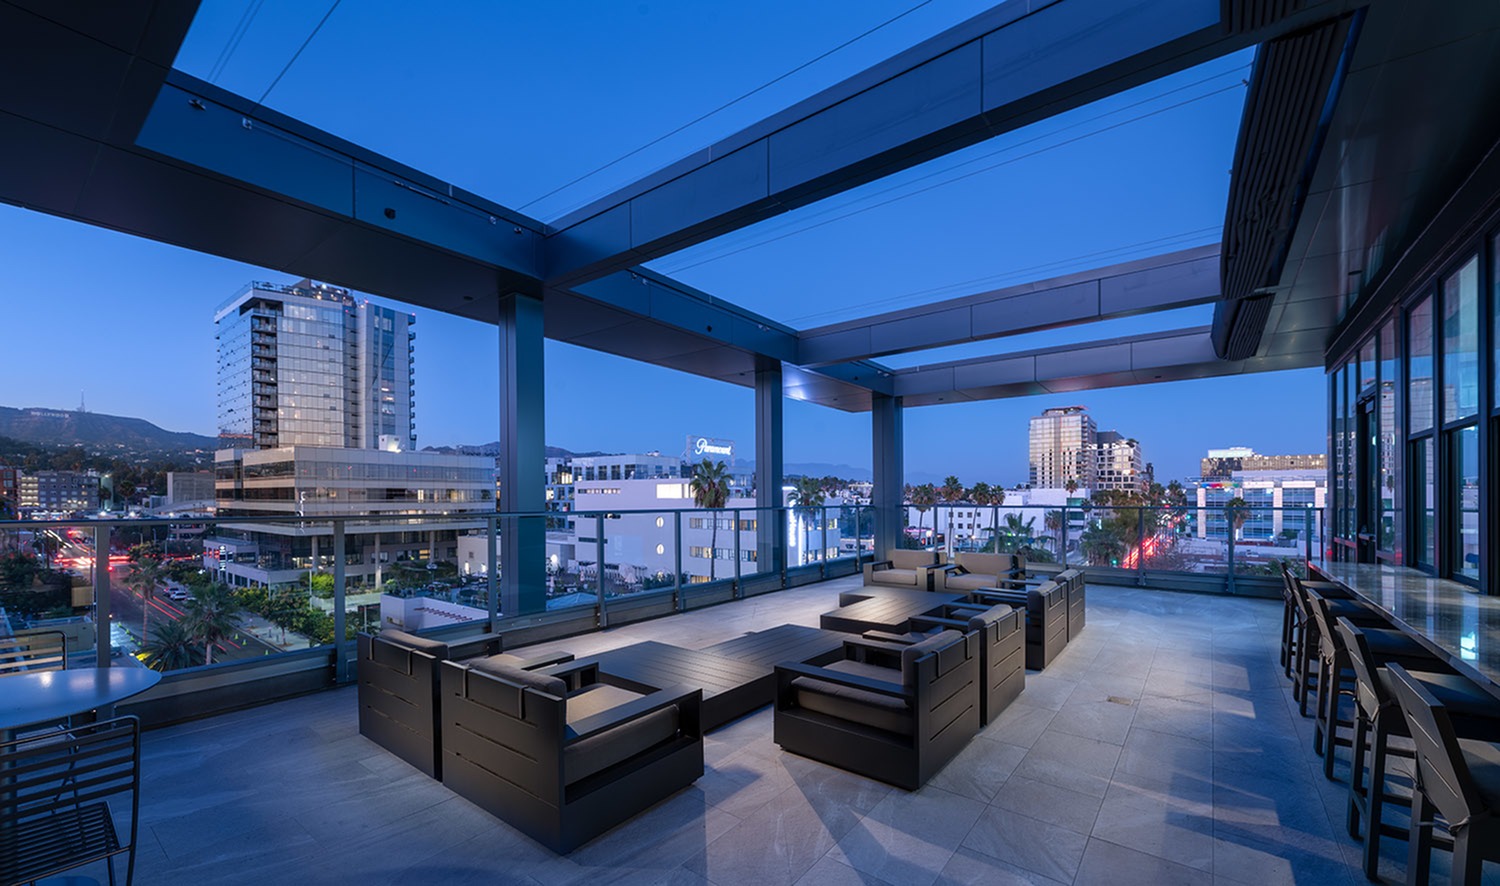 Rooftop skydecks with lounge seating, firepit, outdoor grill, featuring sweeping views of Downtown LA and the Hollywood Sign